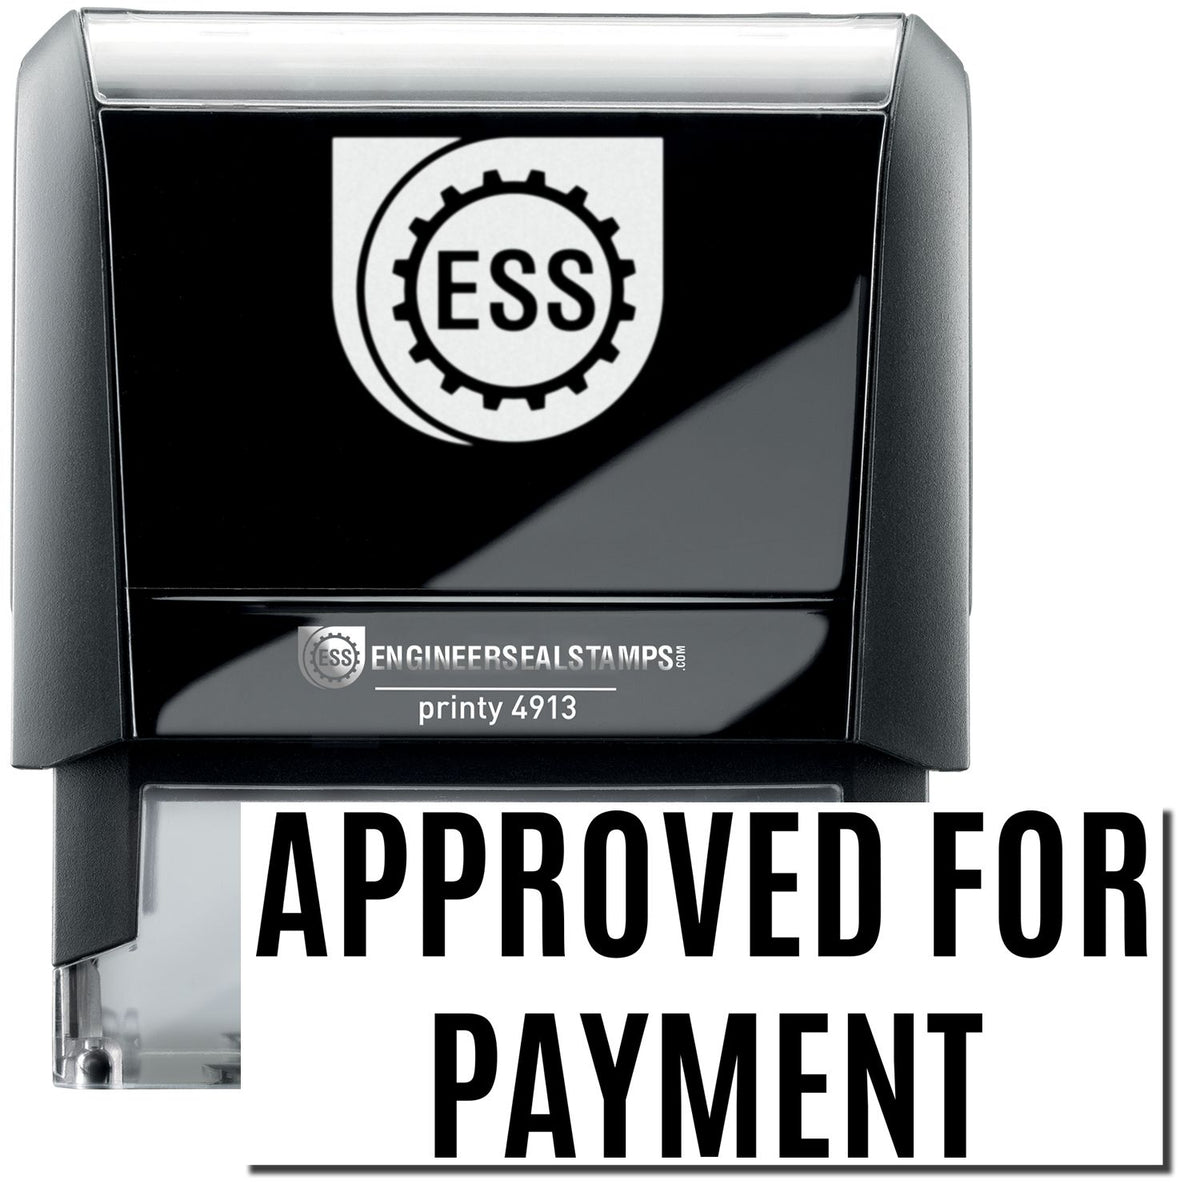 A self-inking stamp with a stamped image showing how the text &quot;APPROVED FOR PAYMENT&quot; in a large narrow font is displayed by it after stamping.